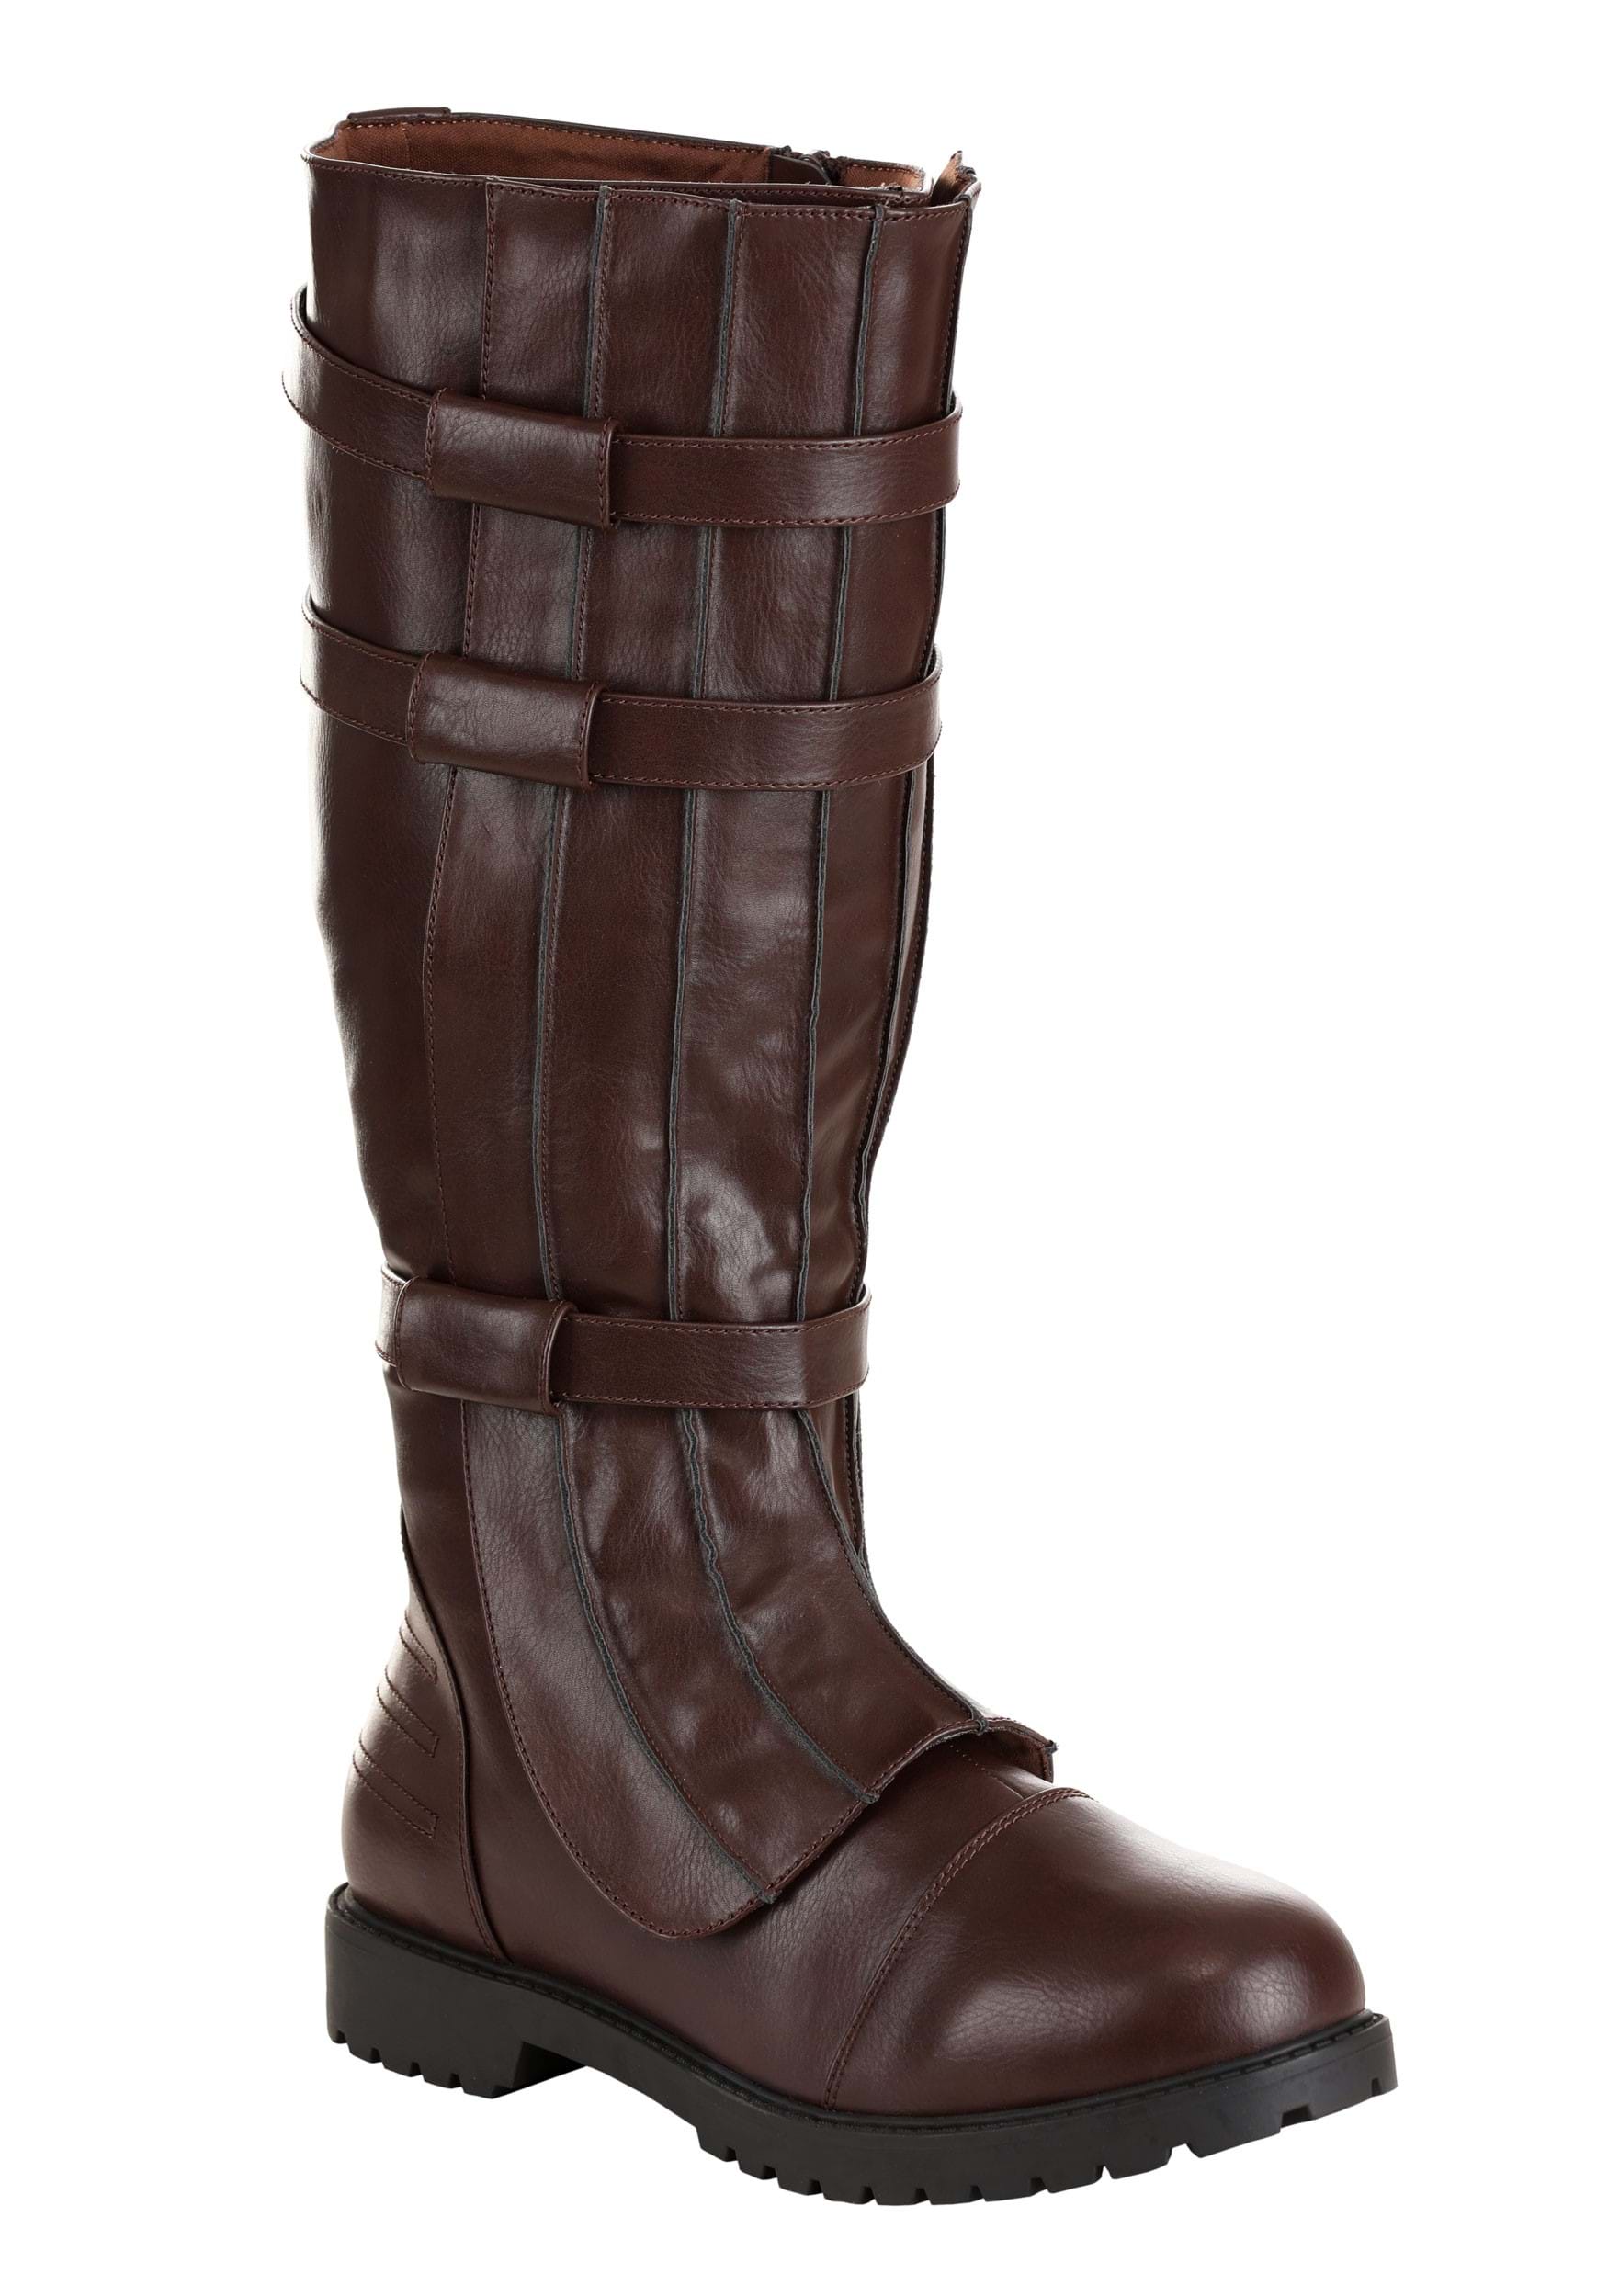 Men’s Brown Boots with Straps